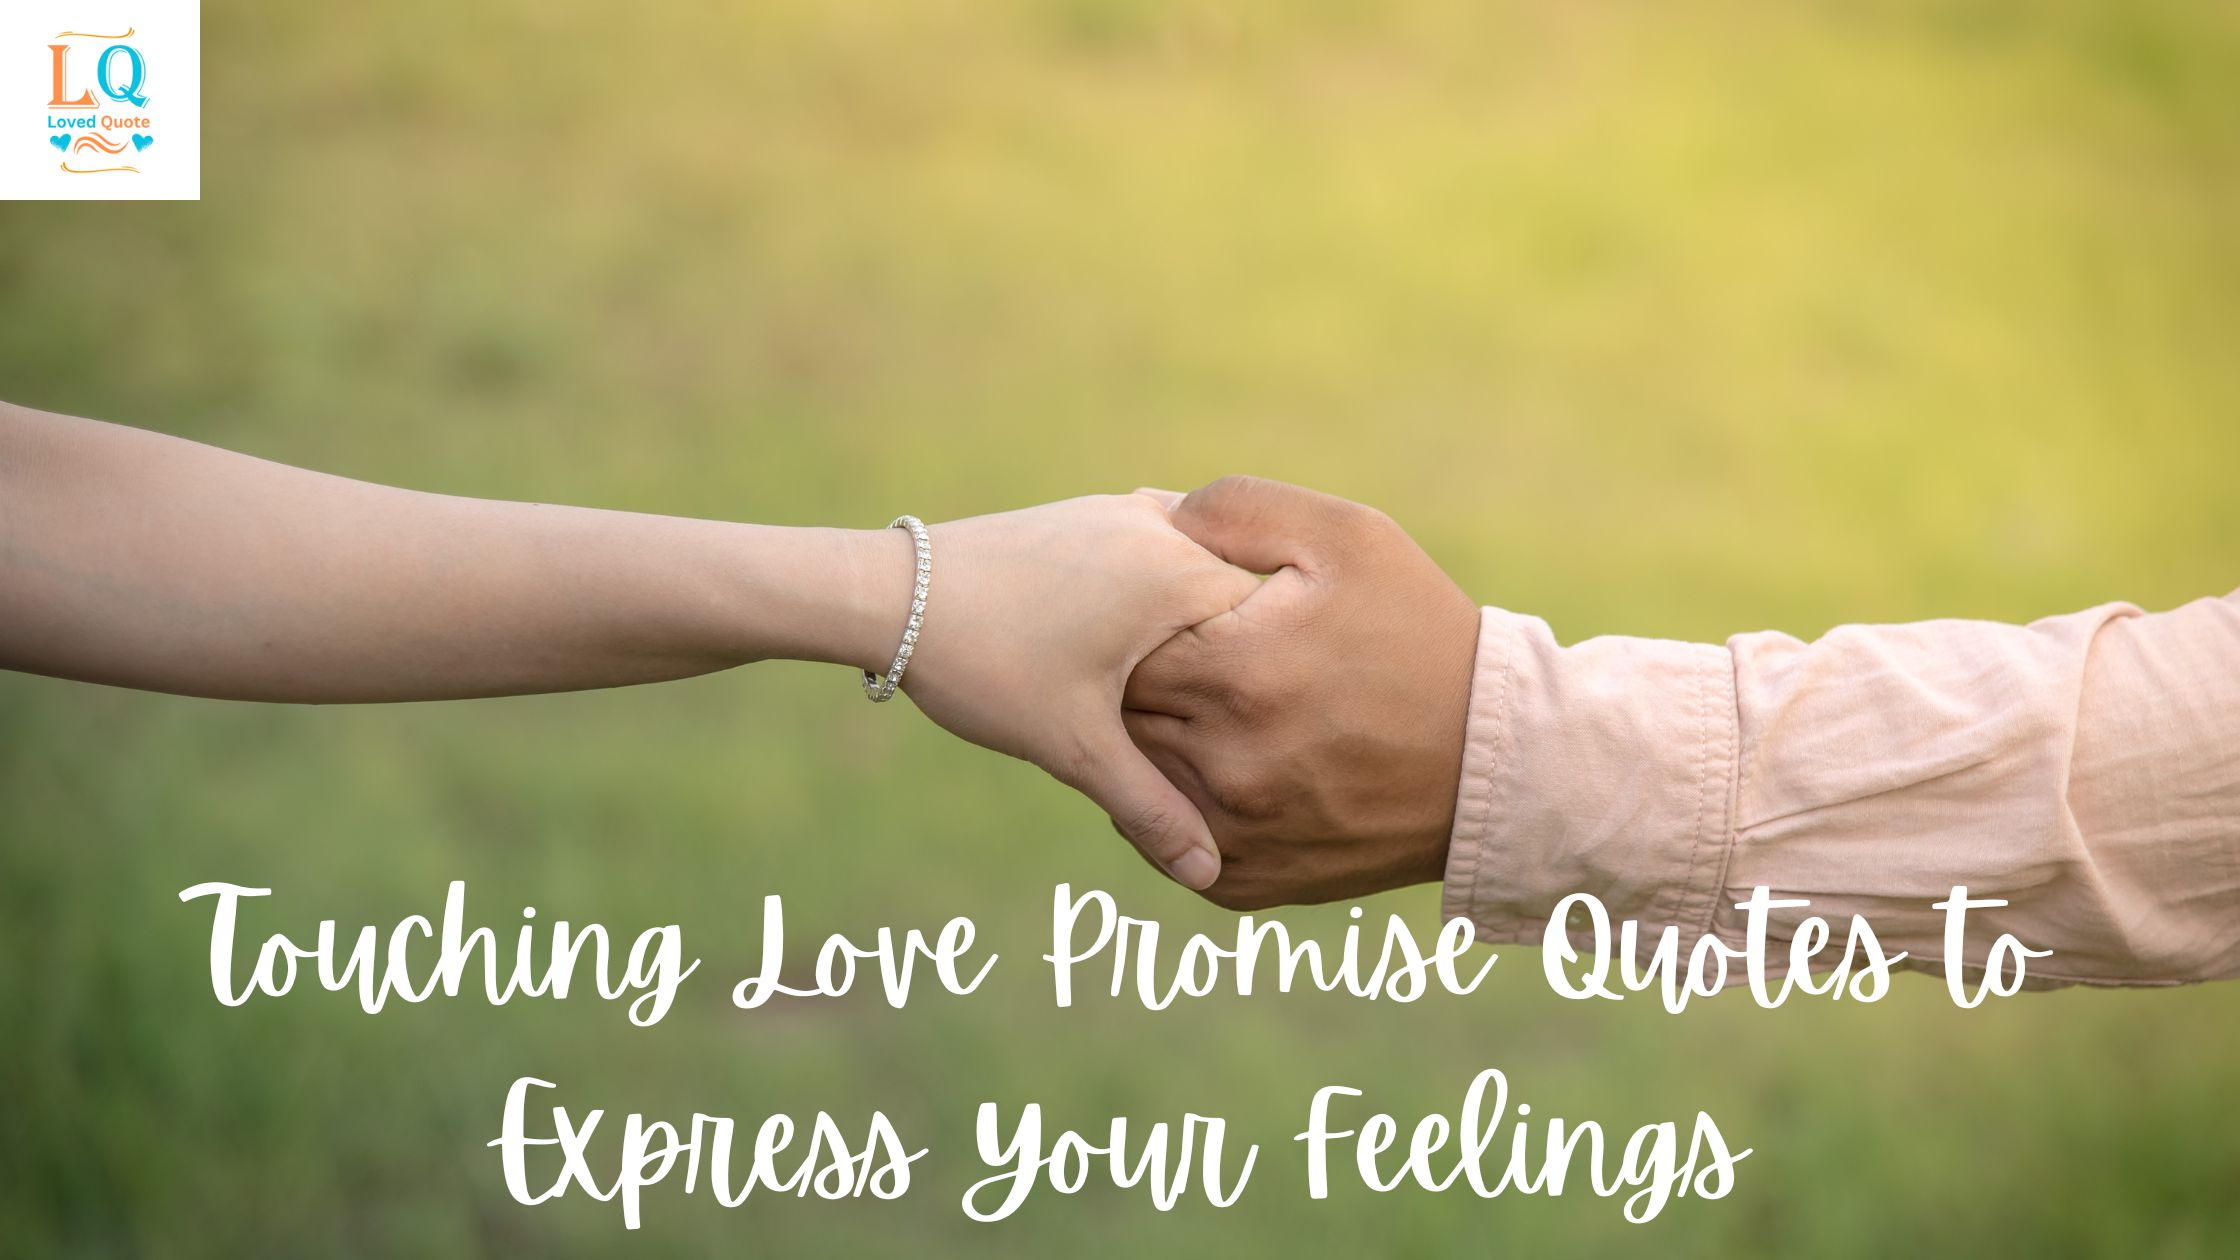 Touching Love Promise Quotes to Express Your Feelings